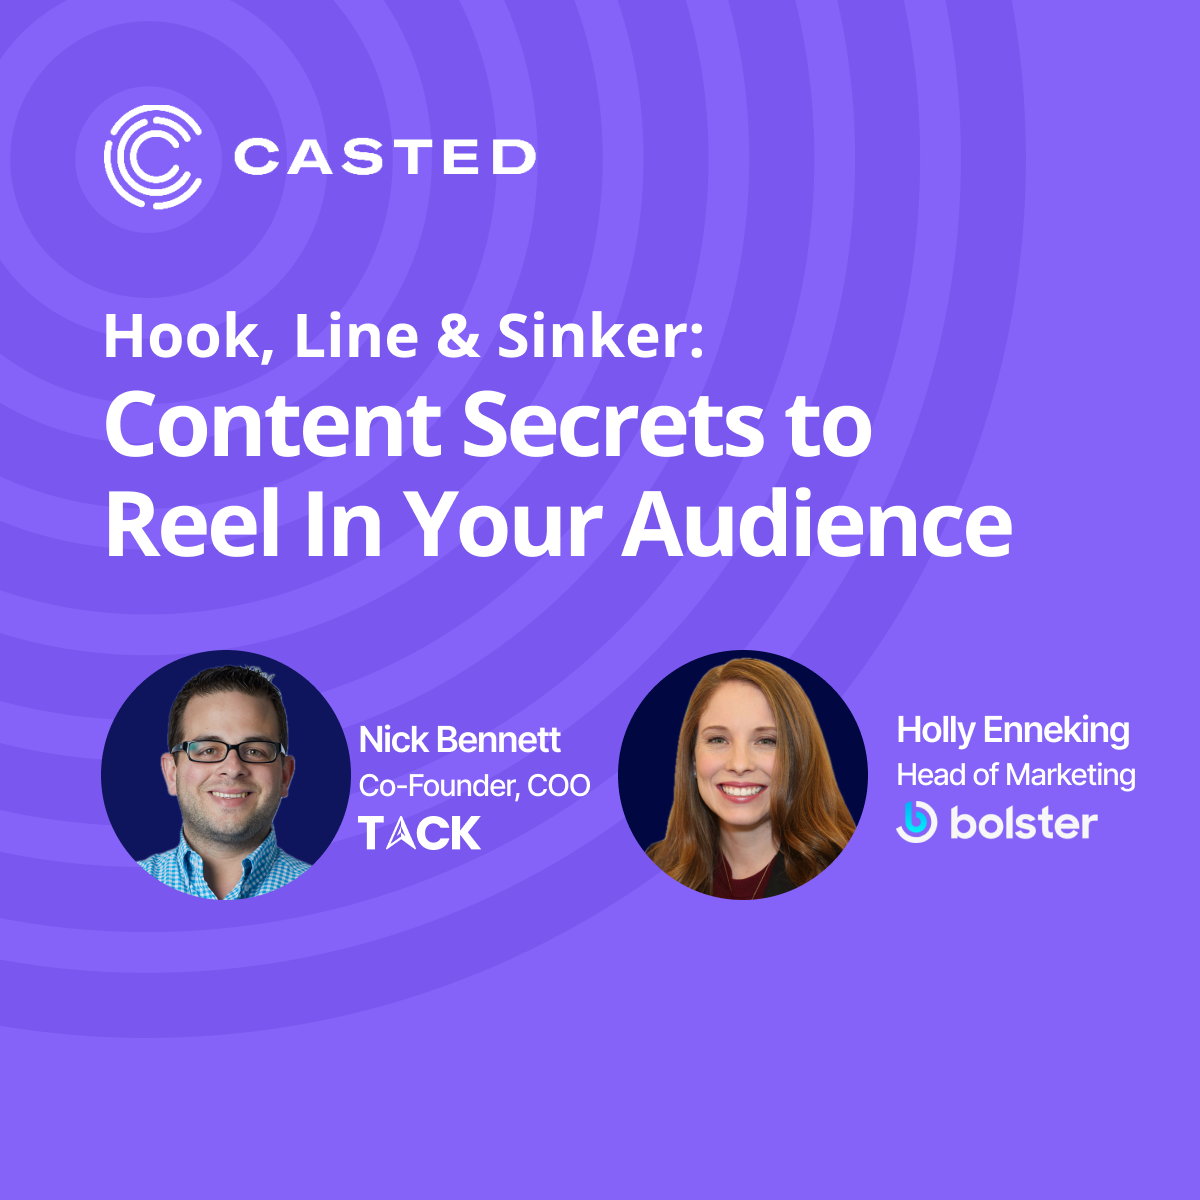 Content Secrets to Reel In Your Audience